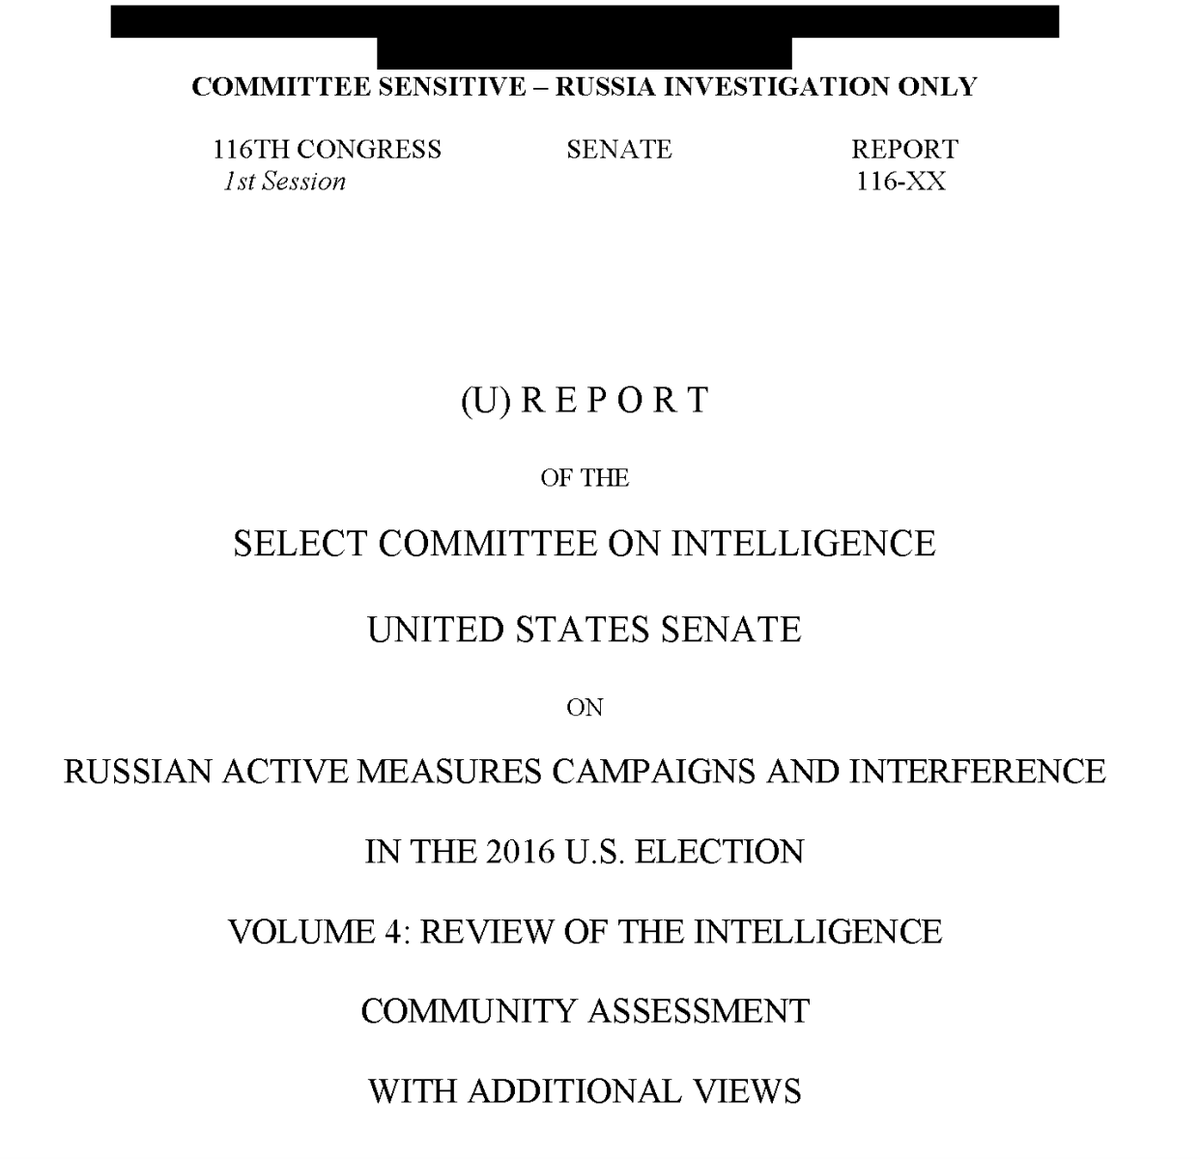 Senate Intel Cmte released its 4th of 5 reports as part of its bipartisan Russia 2016 election interference investigation (158 pages).  https://www.intelligence.senate.gov/sites/default/files/documents/Report_Volume4.pdf